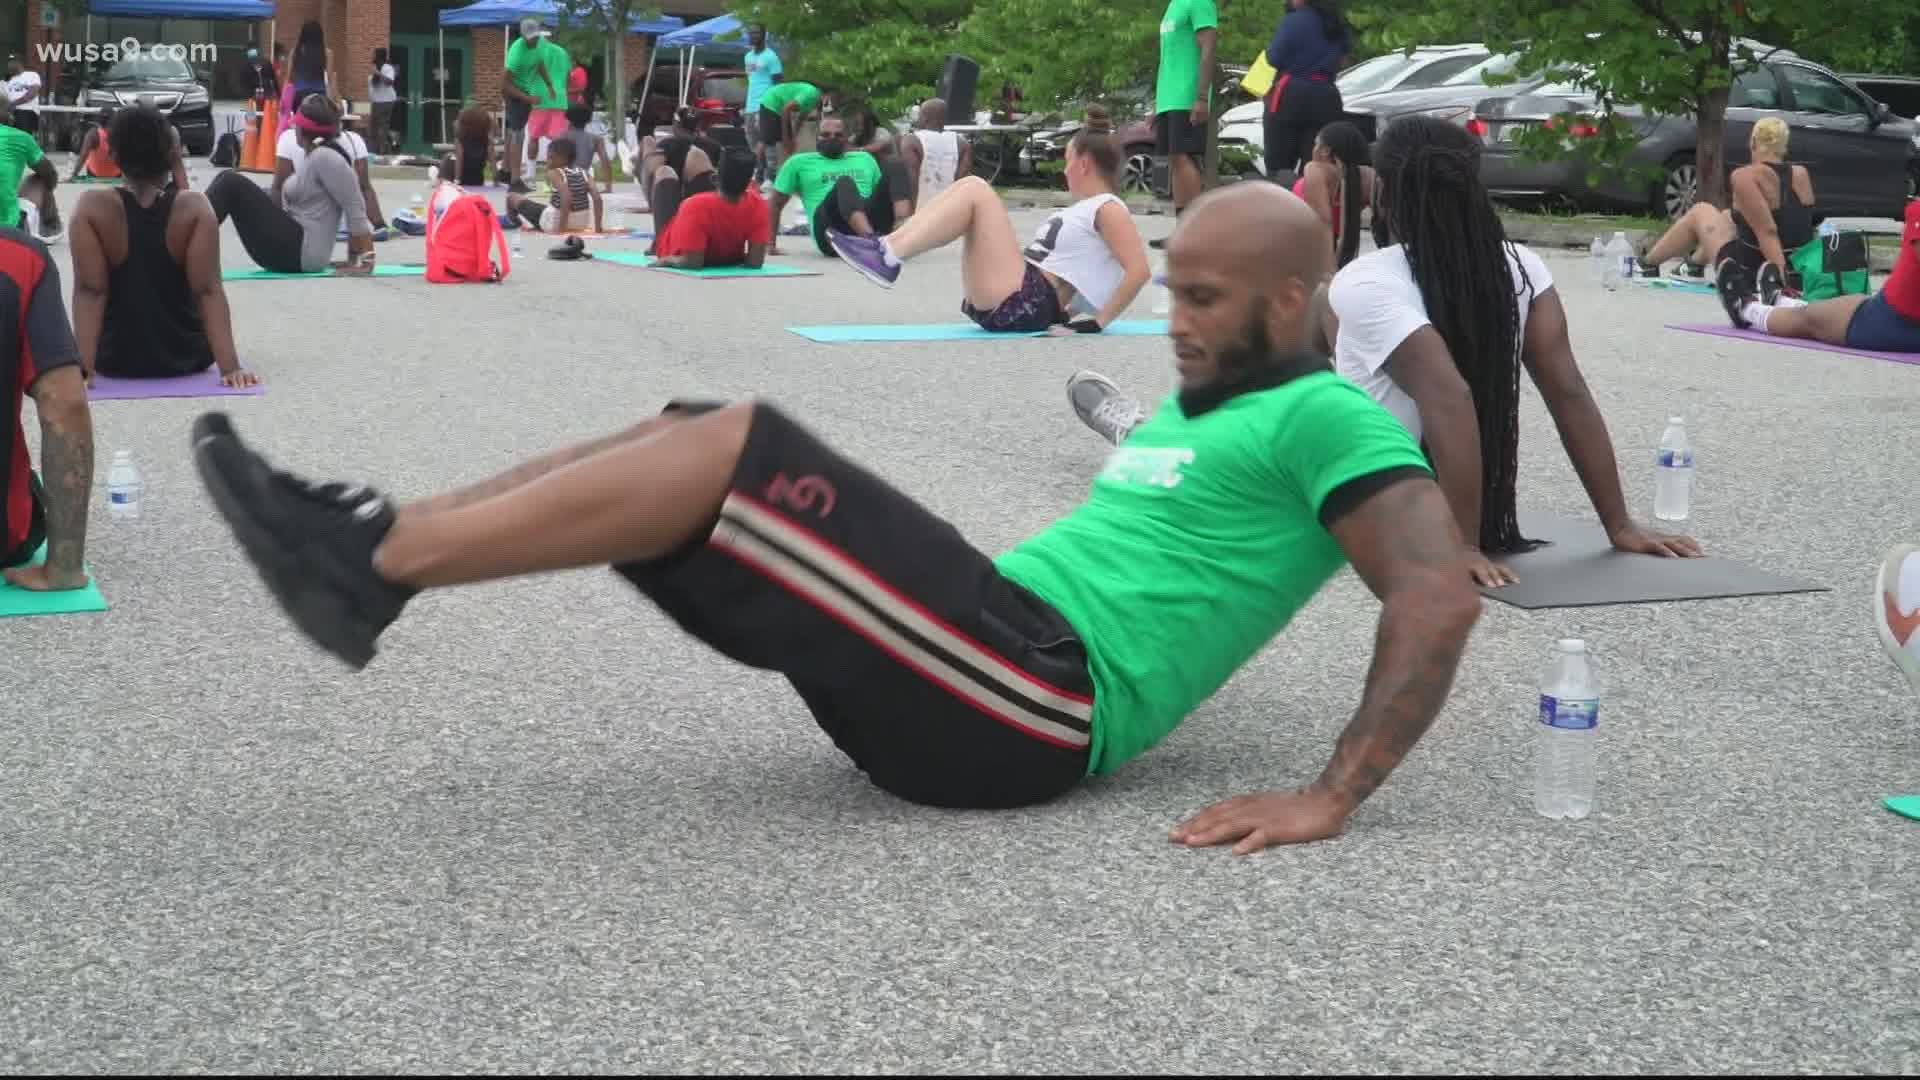 A DC local offers free pop-up fitness classes to residents in communities who don't have access to healthy food options